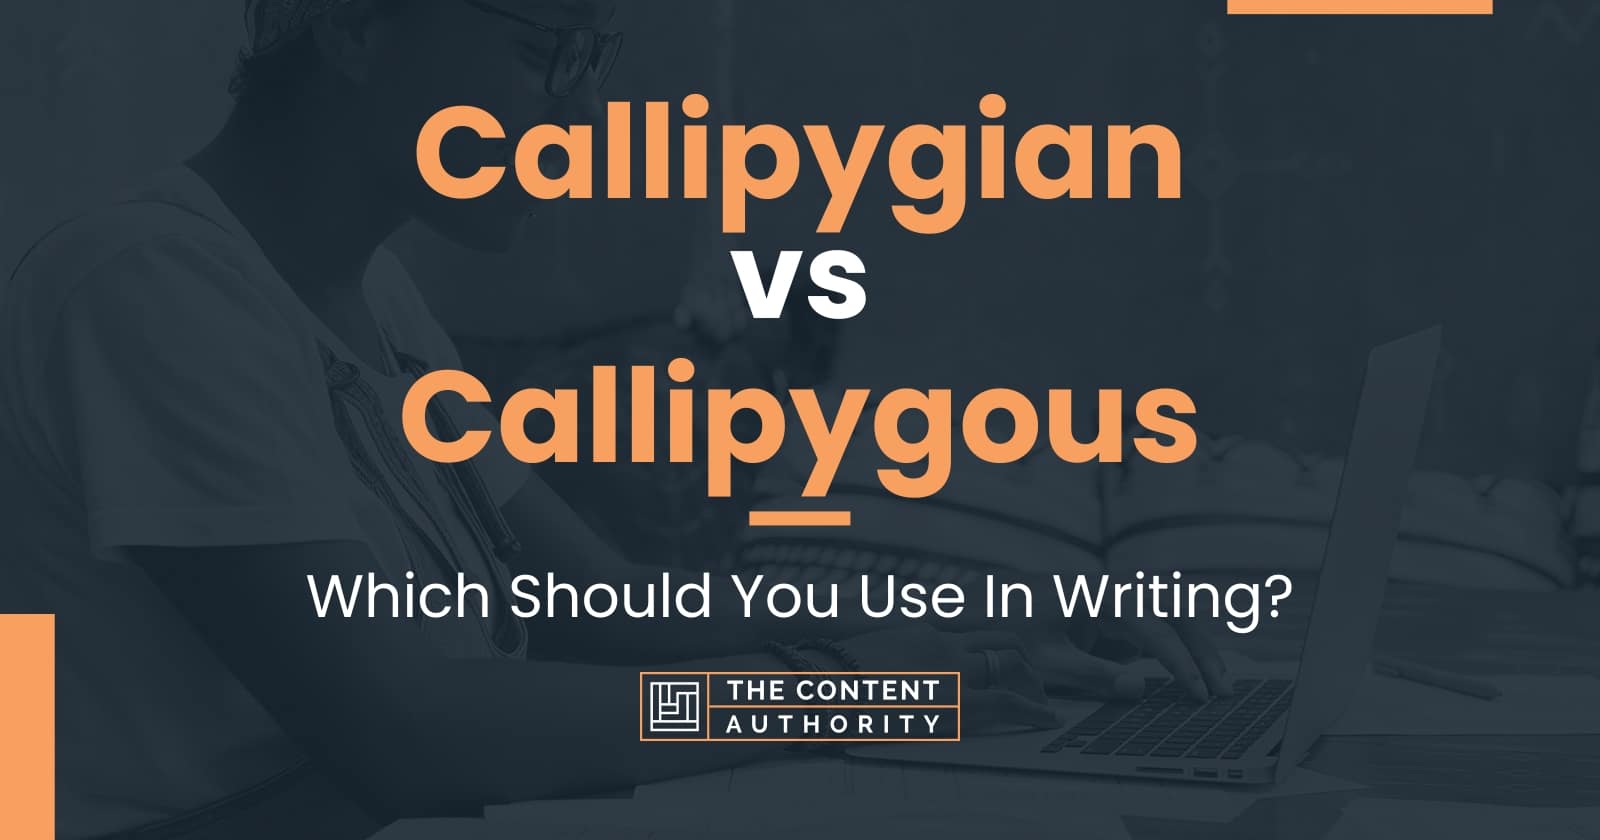 Callipygian vs Callipygous: Which Should You Use In Writing?